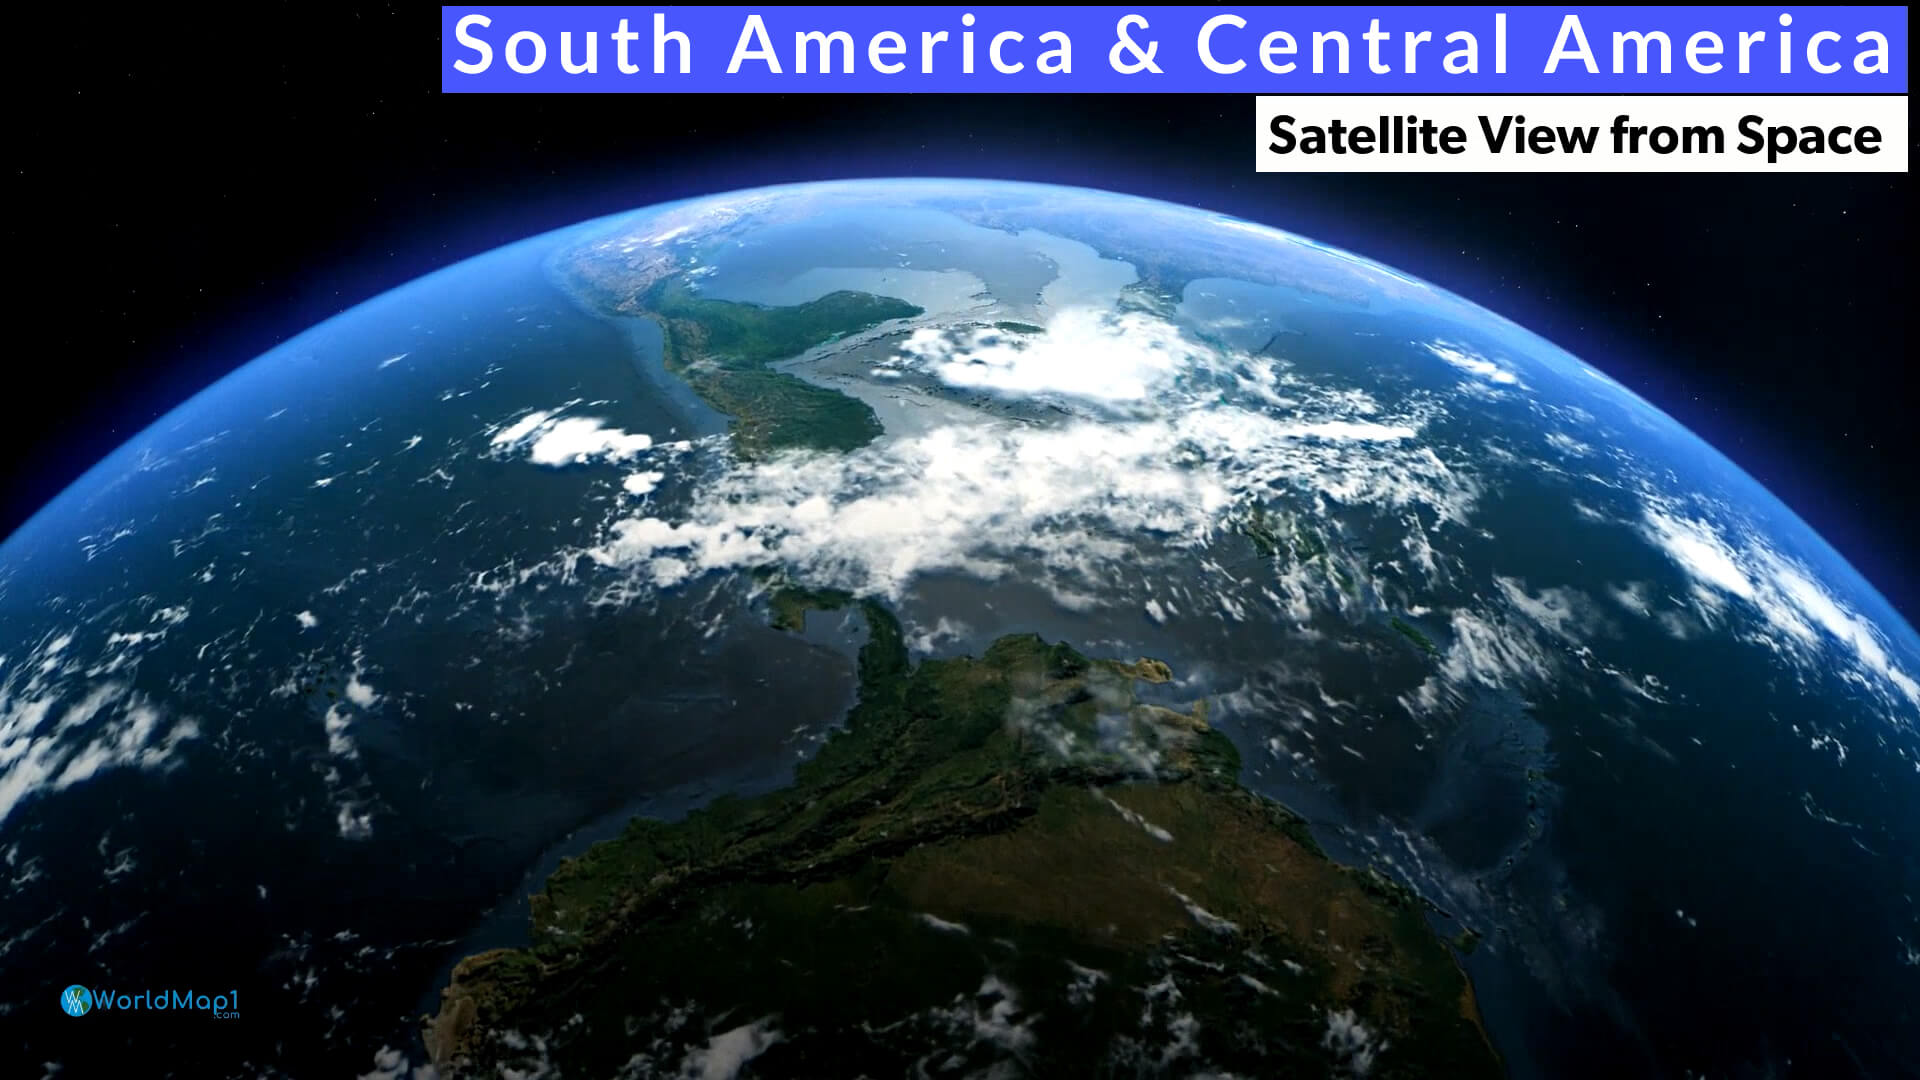 South America and Central America Satellite View